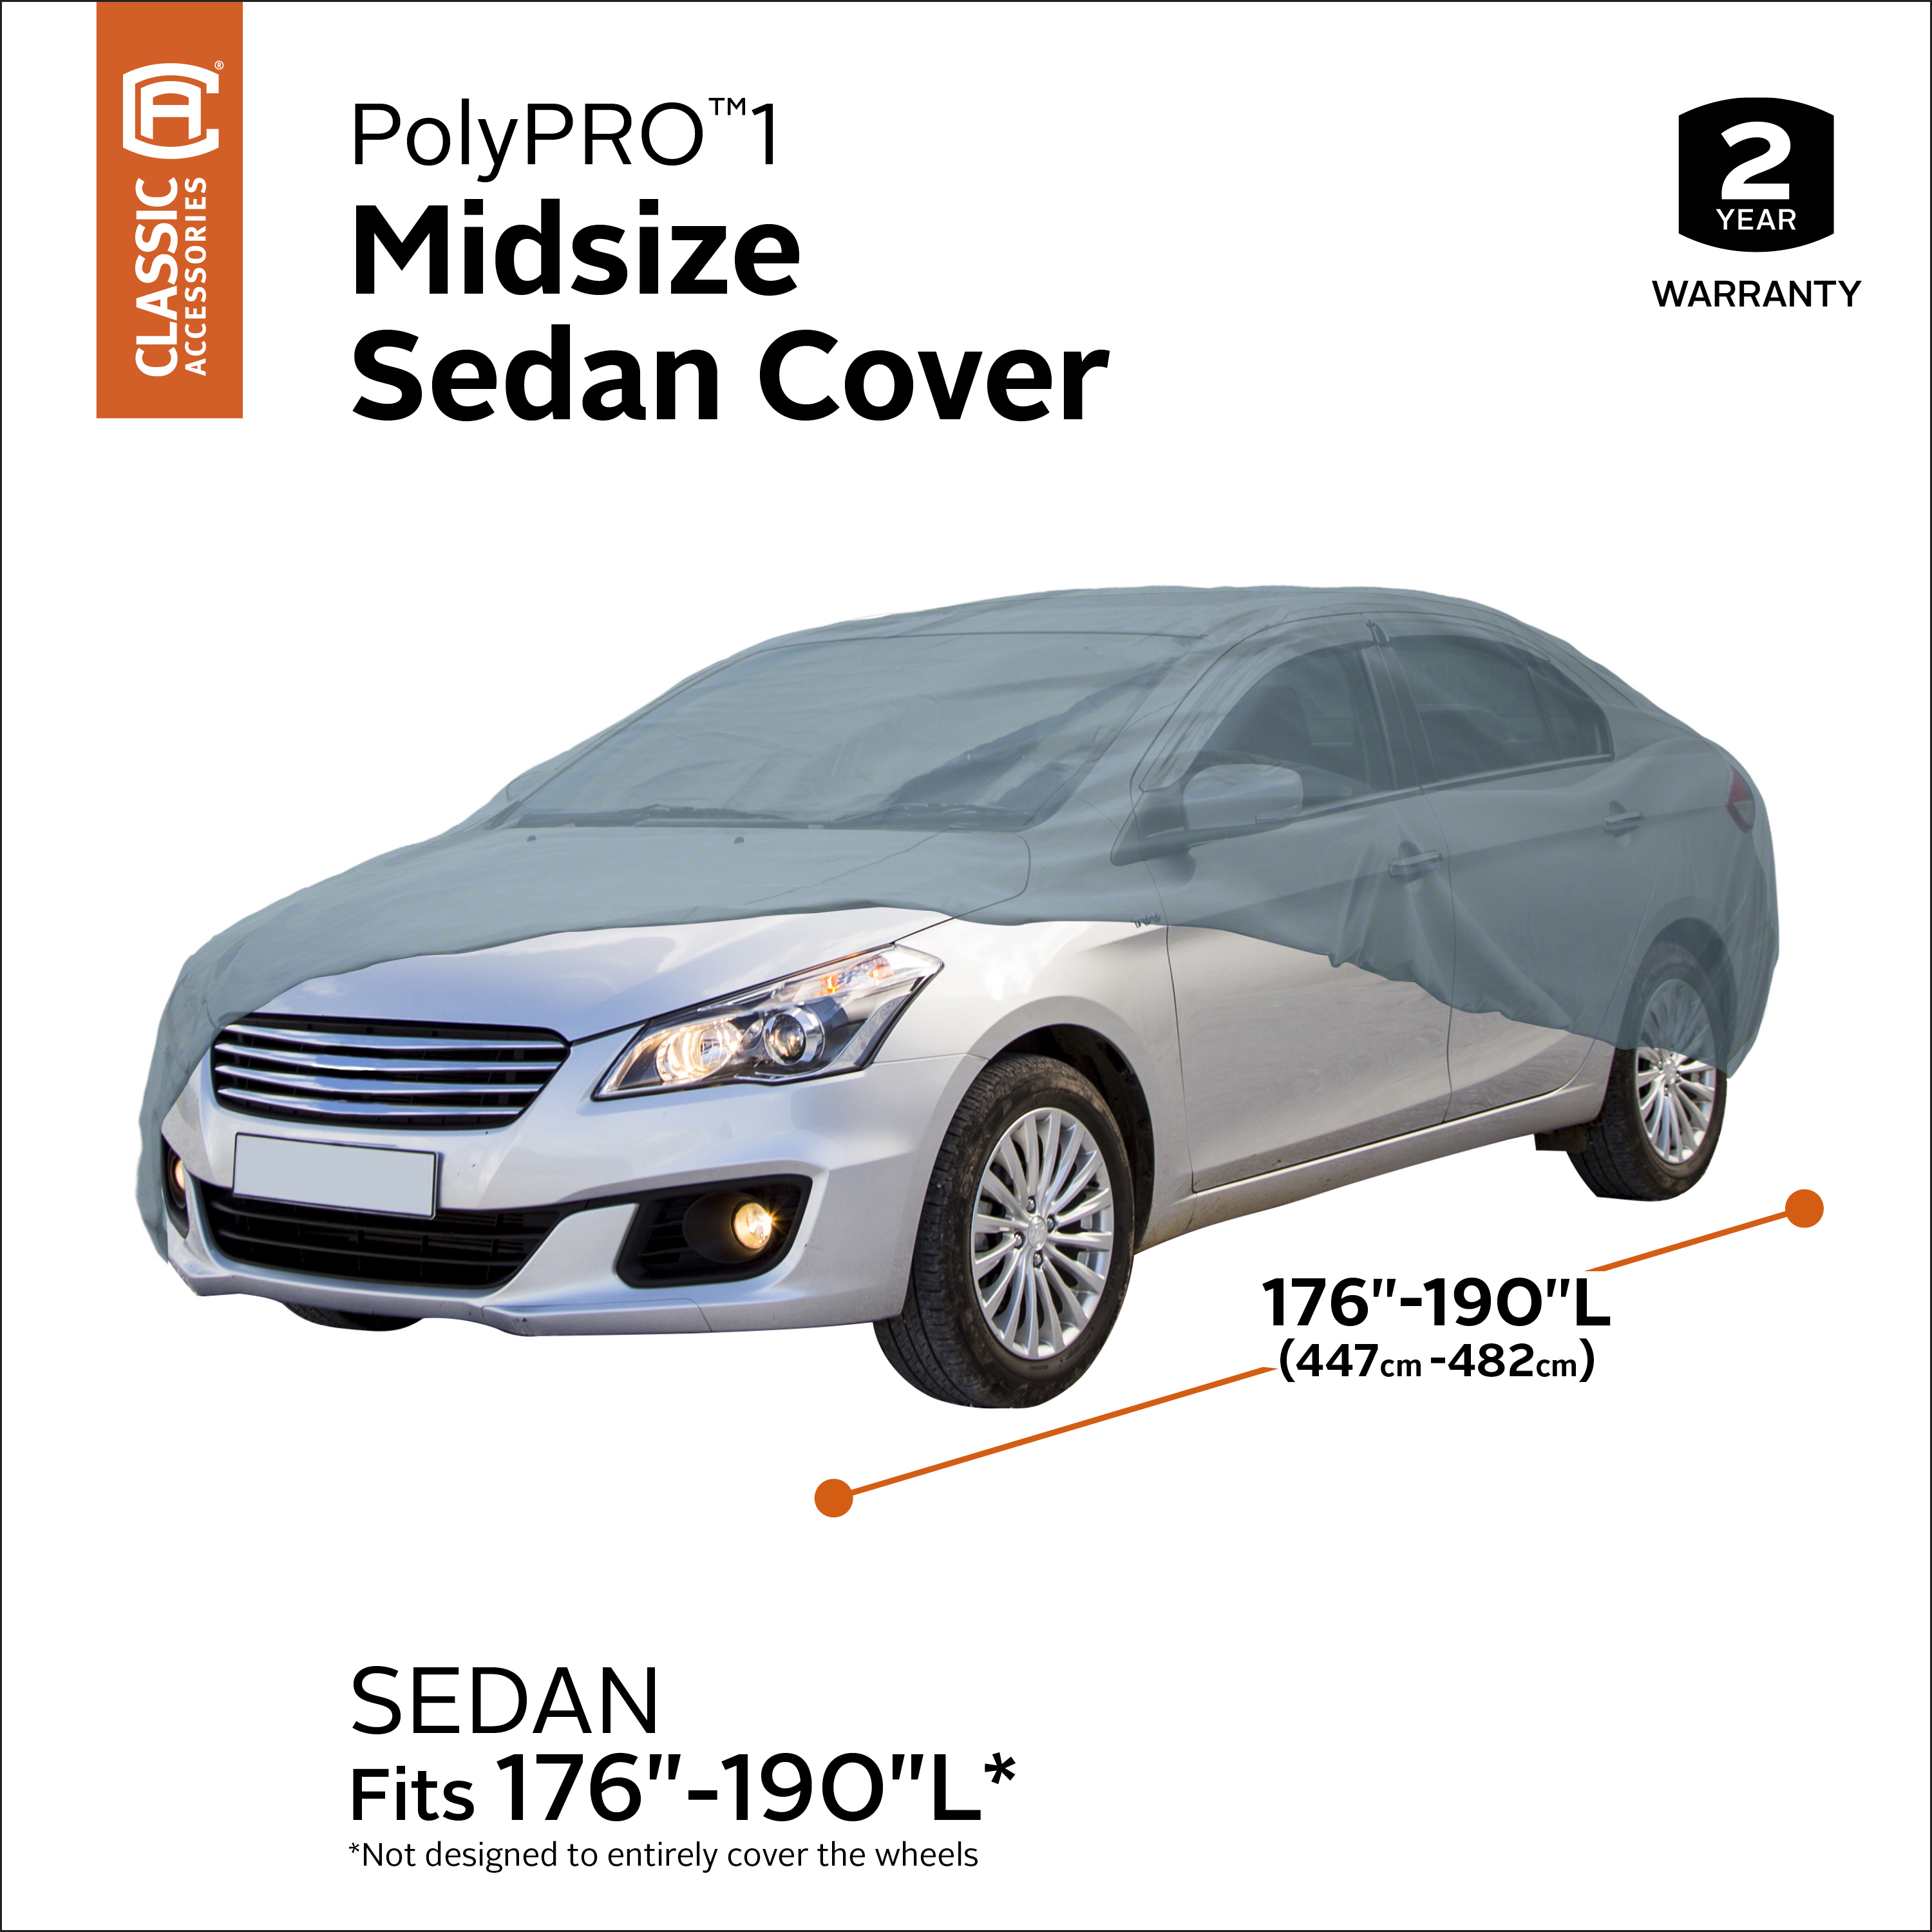 Classic Accessories OverDrive PolyPRO™ 1 Mid-Size Sedan Car Cover, 176" - 190"L, Biodiesel - image 4 of 8